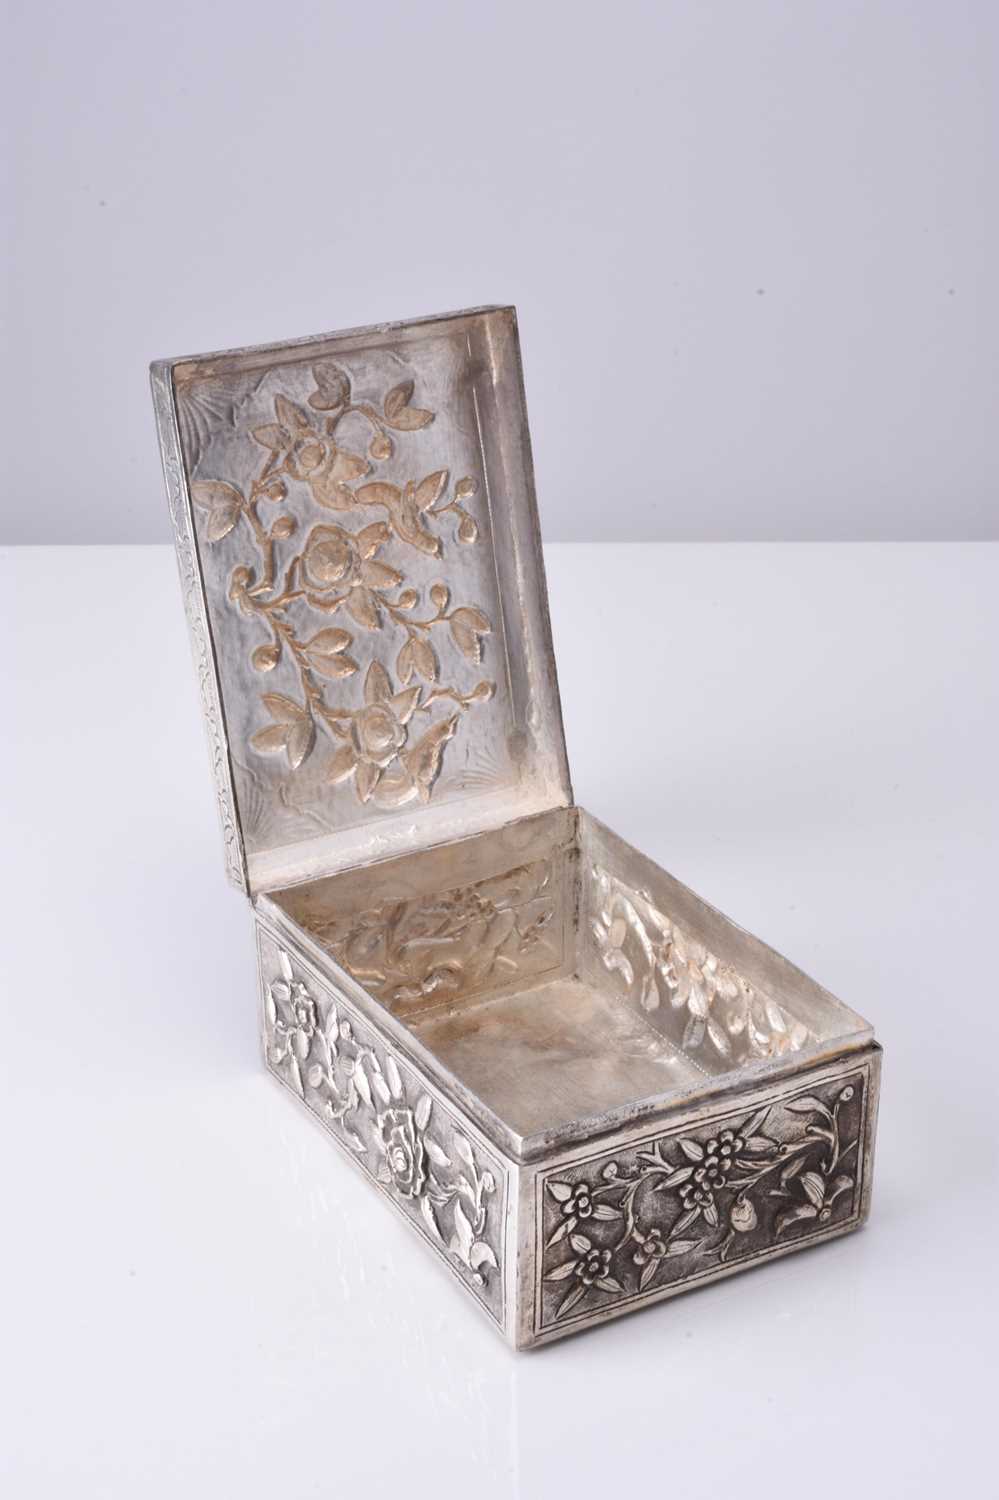 A Chinese silver plated embossed box, Qing Dynasty - Image 3 of 3